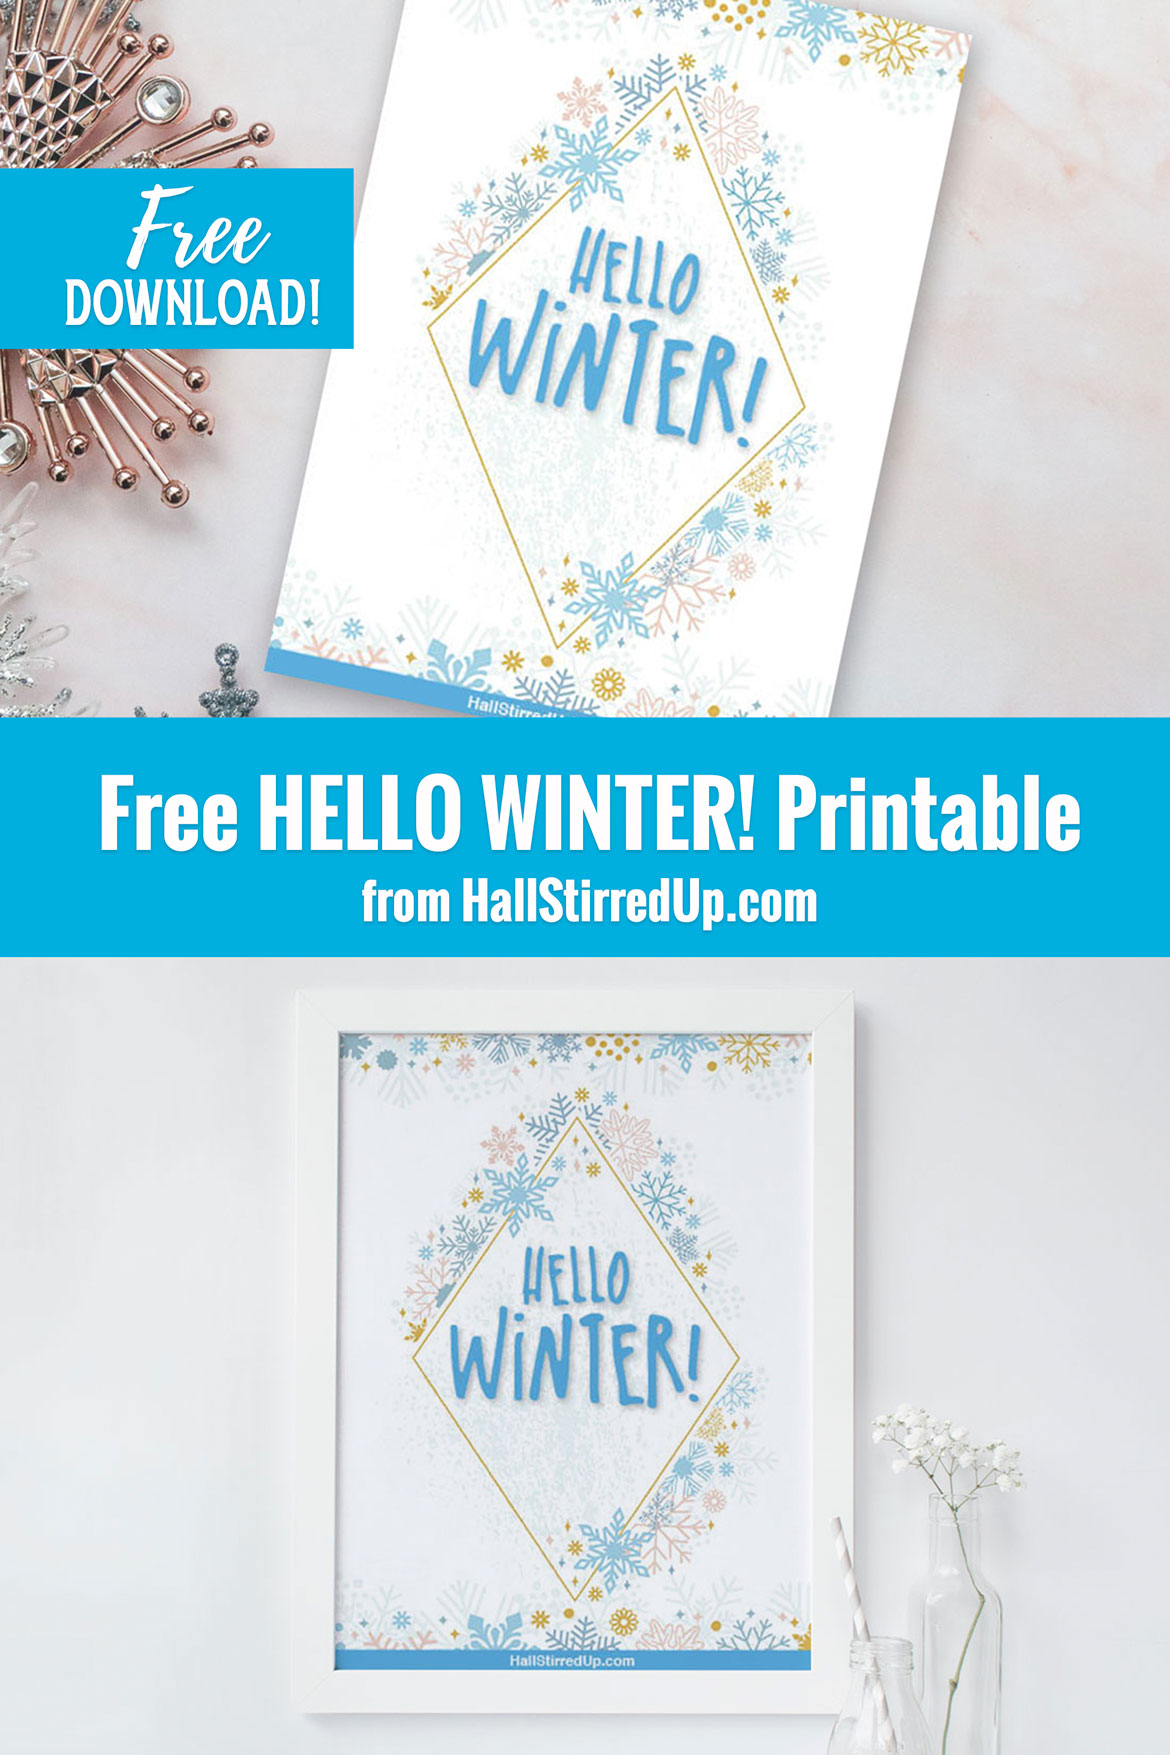 Say Hello to Winter with a free printable from HallStirredUpcom